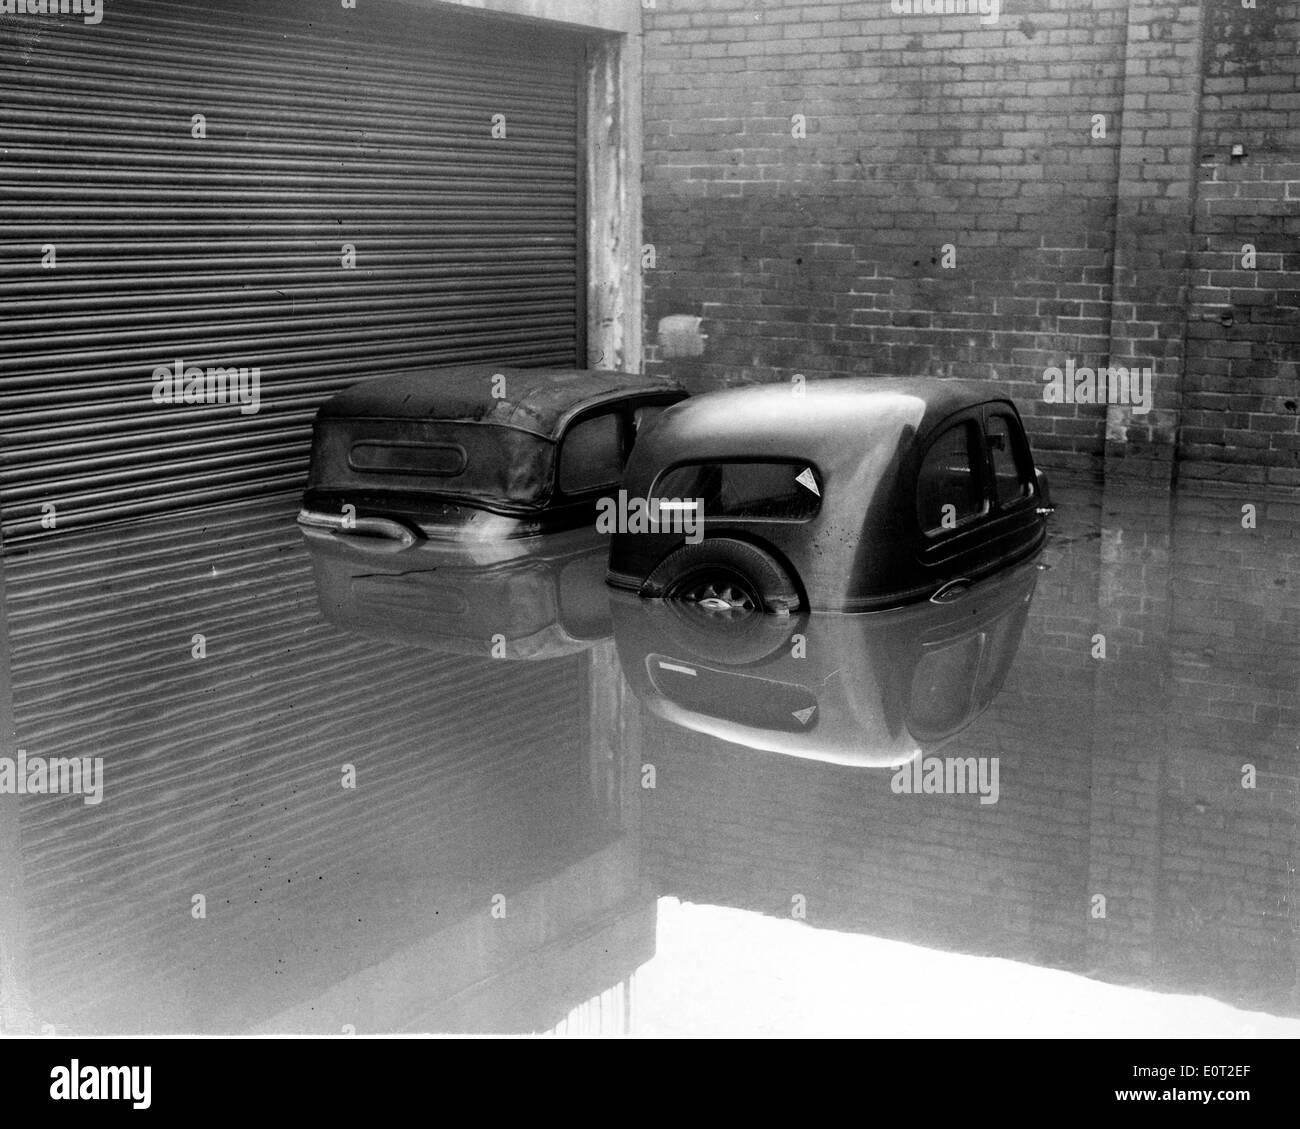 NATURAL DISASTER: 1960 Floods in England Stock Photo